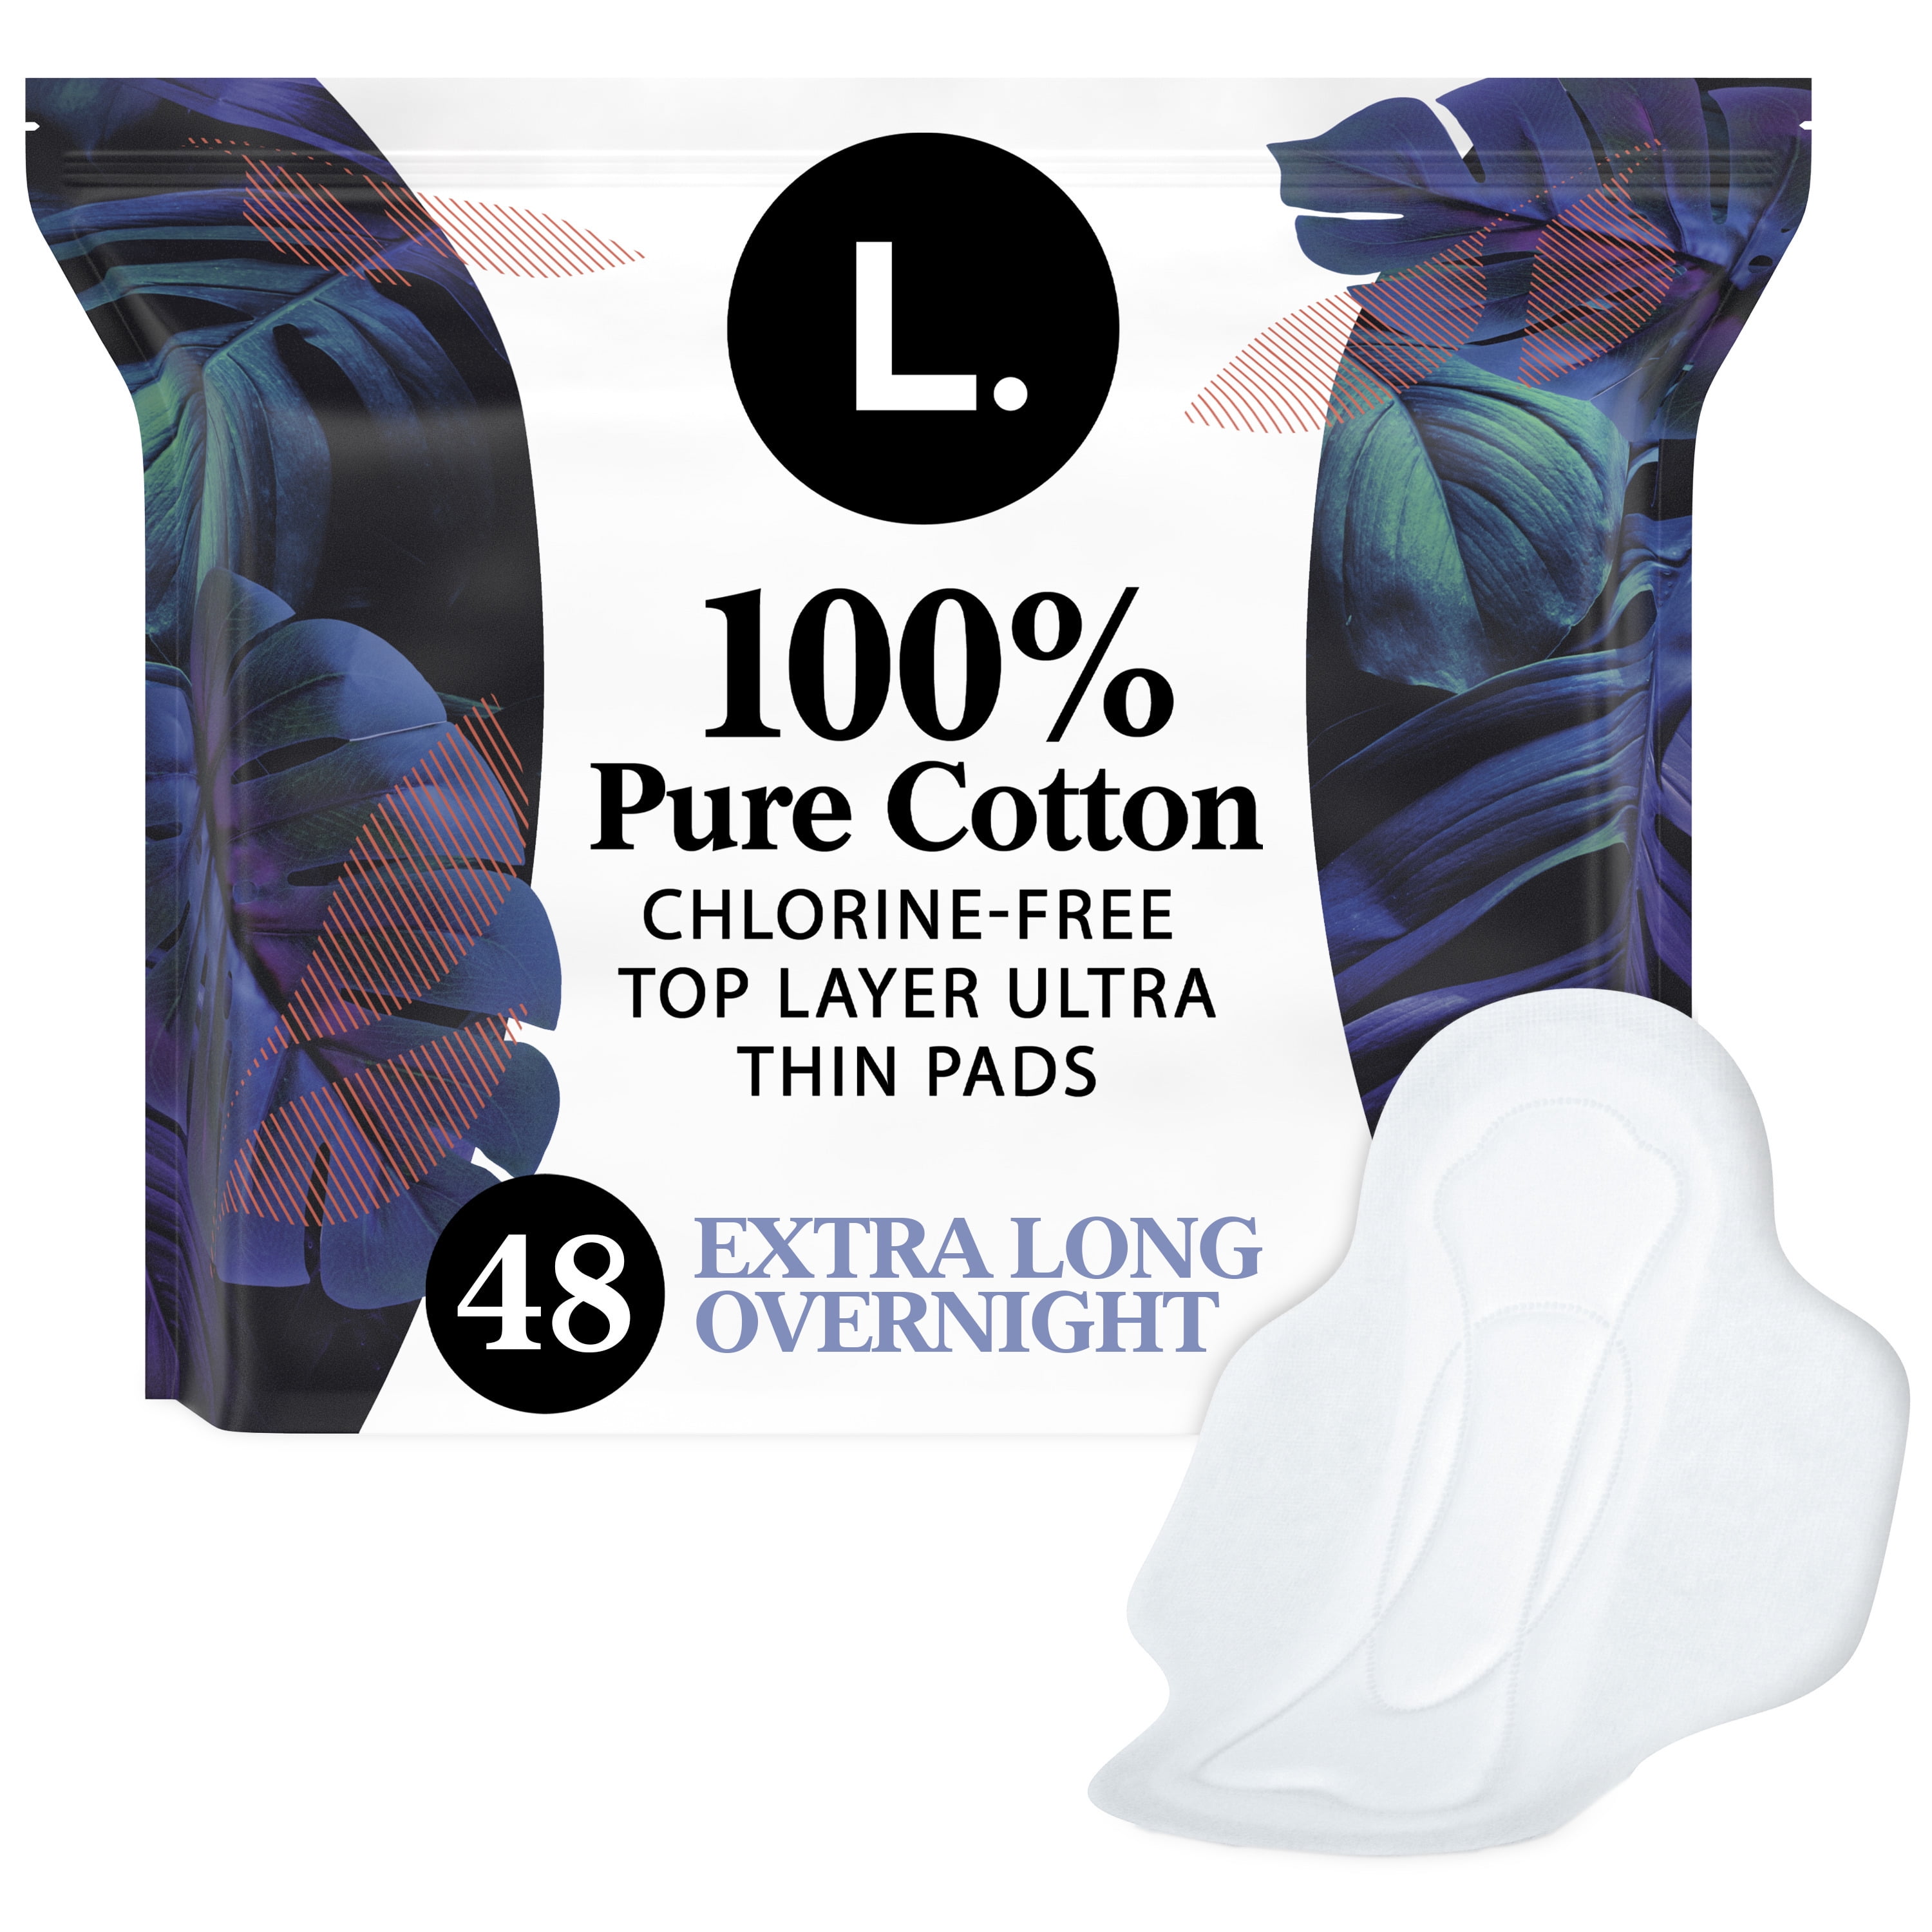 L. Ultra Thin Pads, Overnight Absorbency, 48 Ct, 100% Pure Cotton